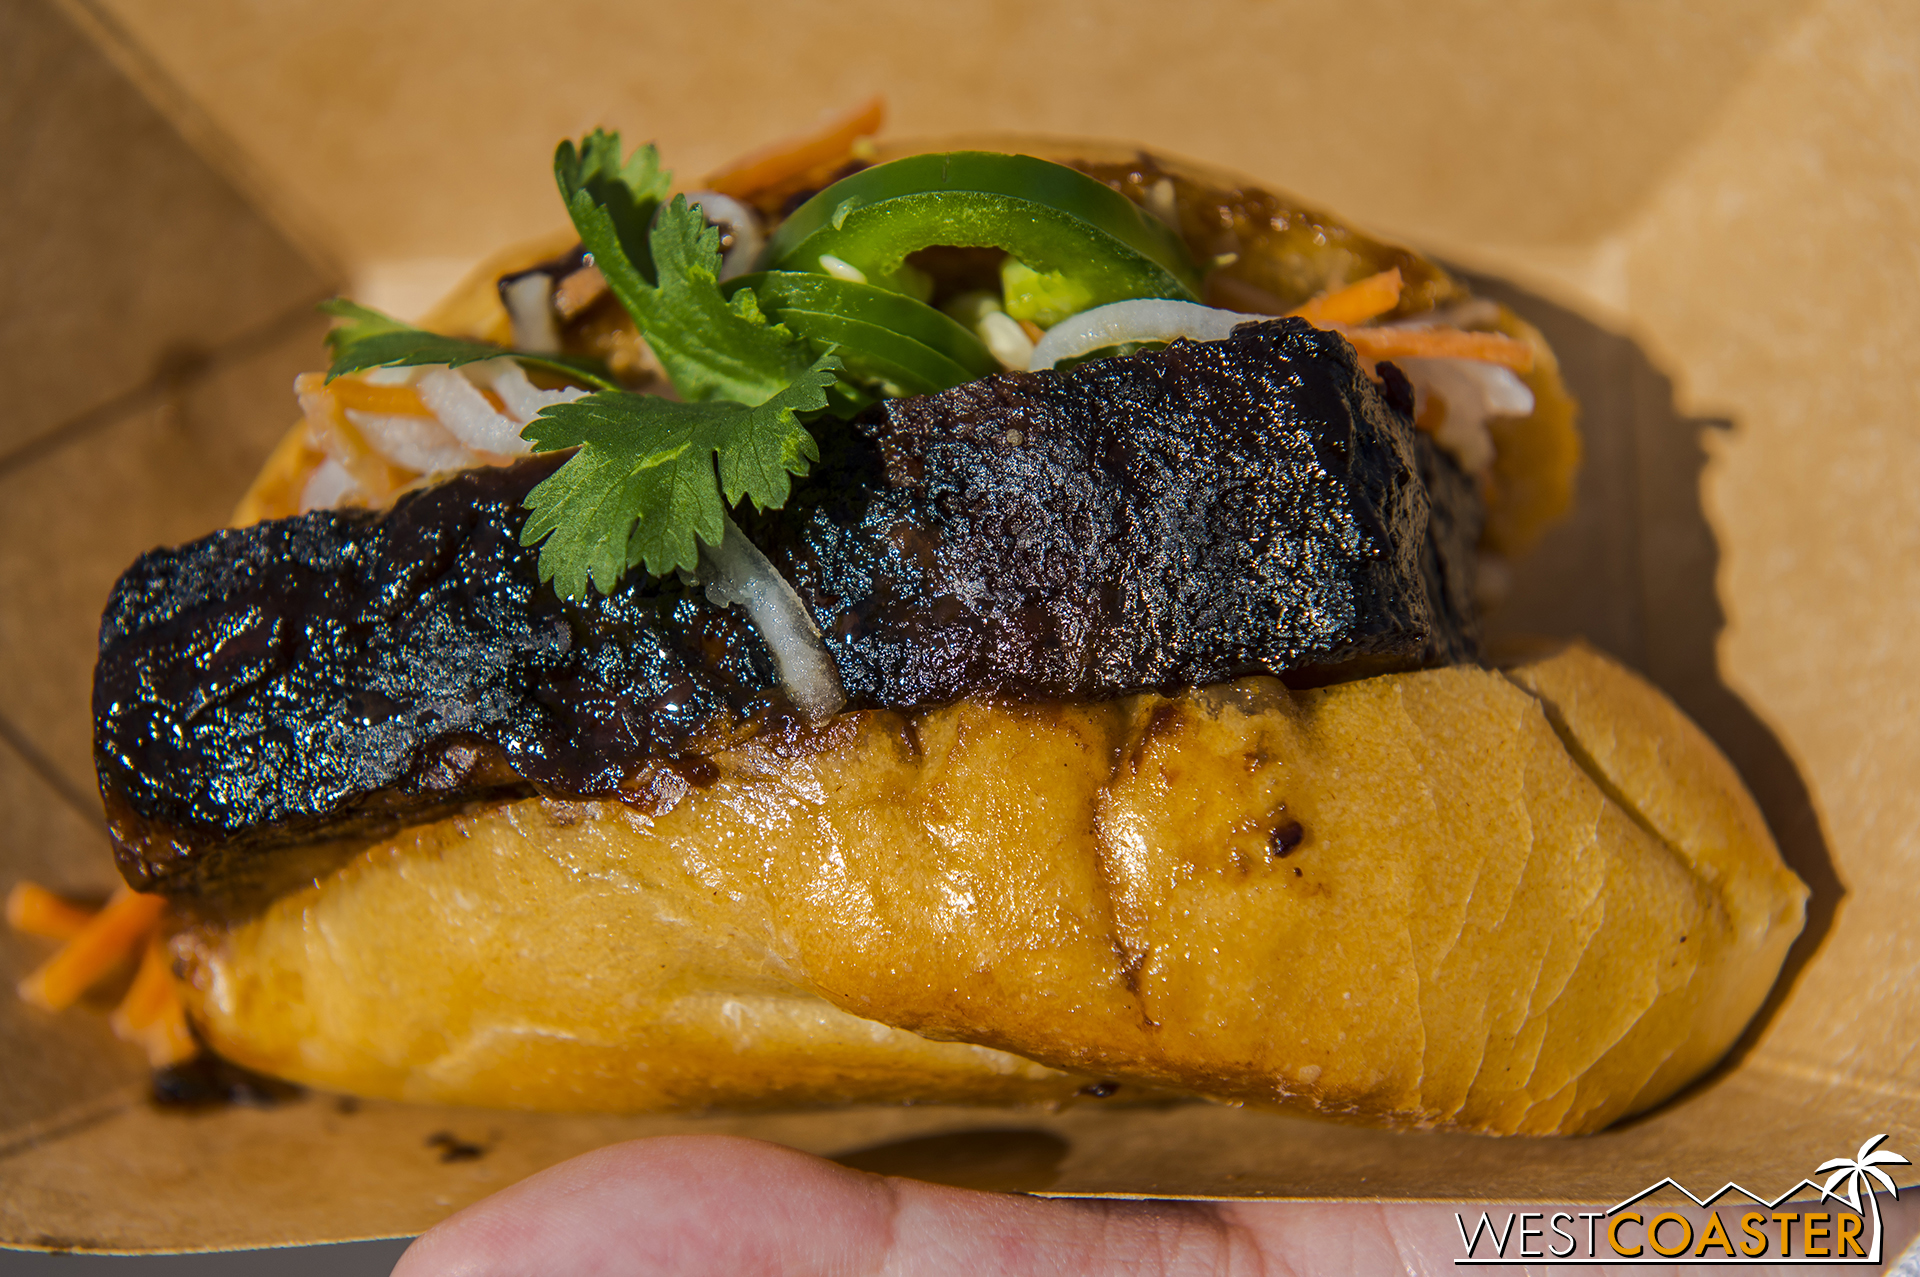  Black Garlic and Soy-braised Pork Belly Banh Mi @ Garlic Kissed  I was pretty full by the time I got to this, but it was still very delicious.&nbsp; The flavor is most similar to the Adobo Pork Belly from last year, which was one of my favorites.&nb